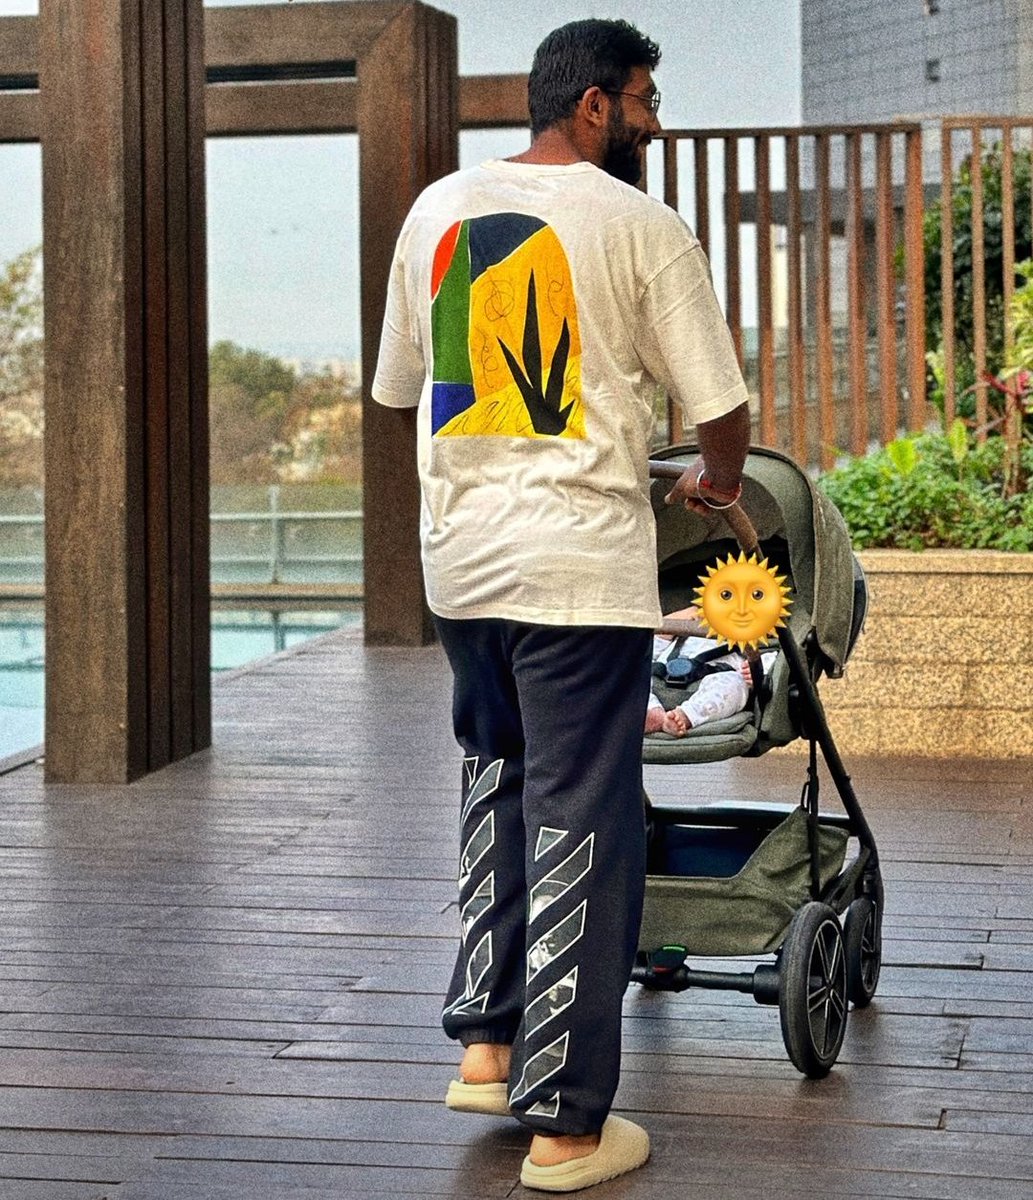 Bumrah enjoying the time with his son. - A beautiful picture.